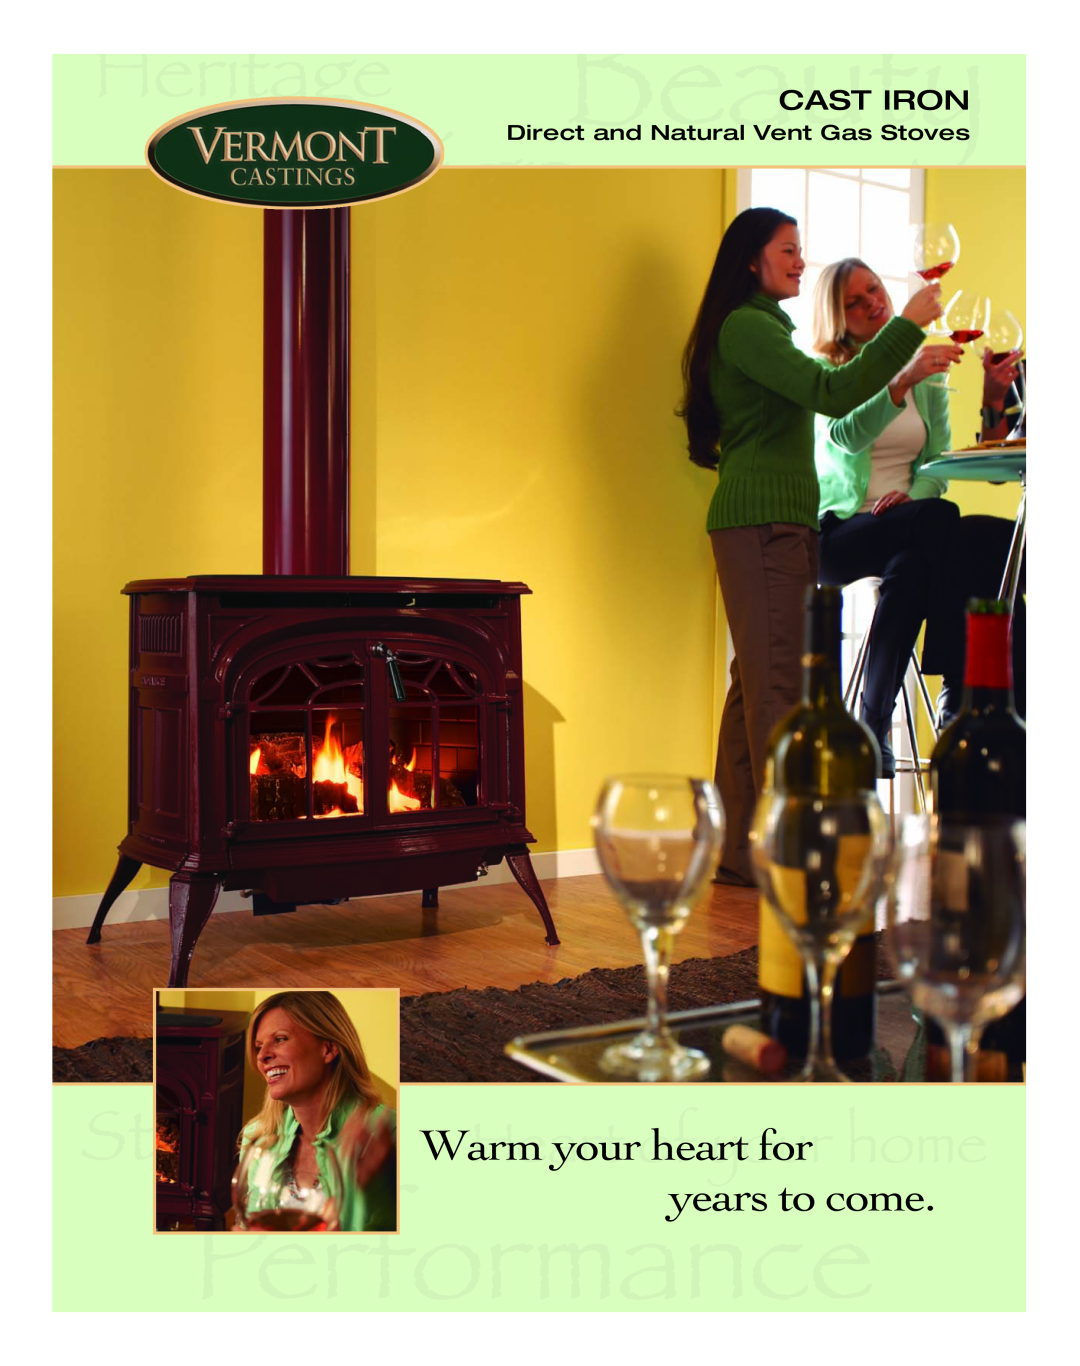 Vermont Casting Cast Iron manual Warm yourheart foryears to come, Direct and Natural Vent Gas Stoves 